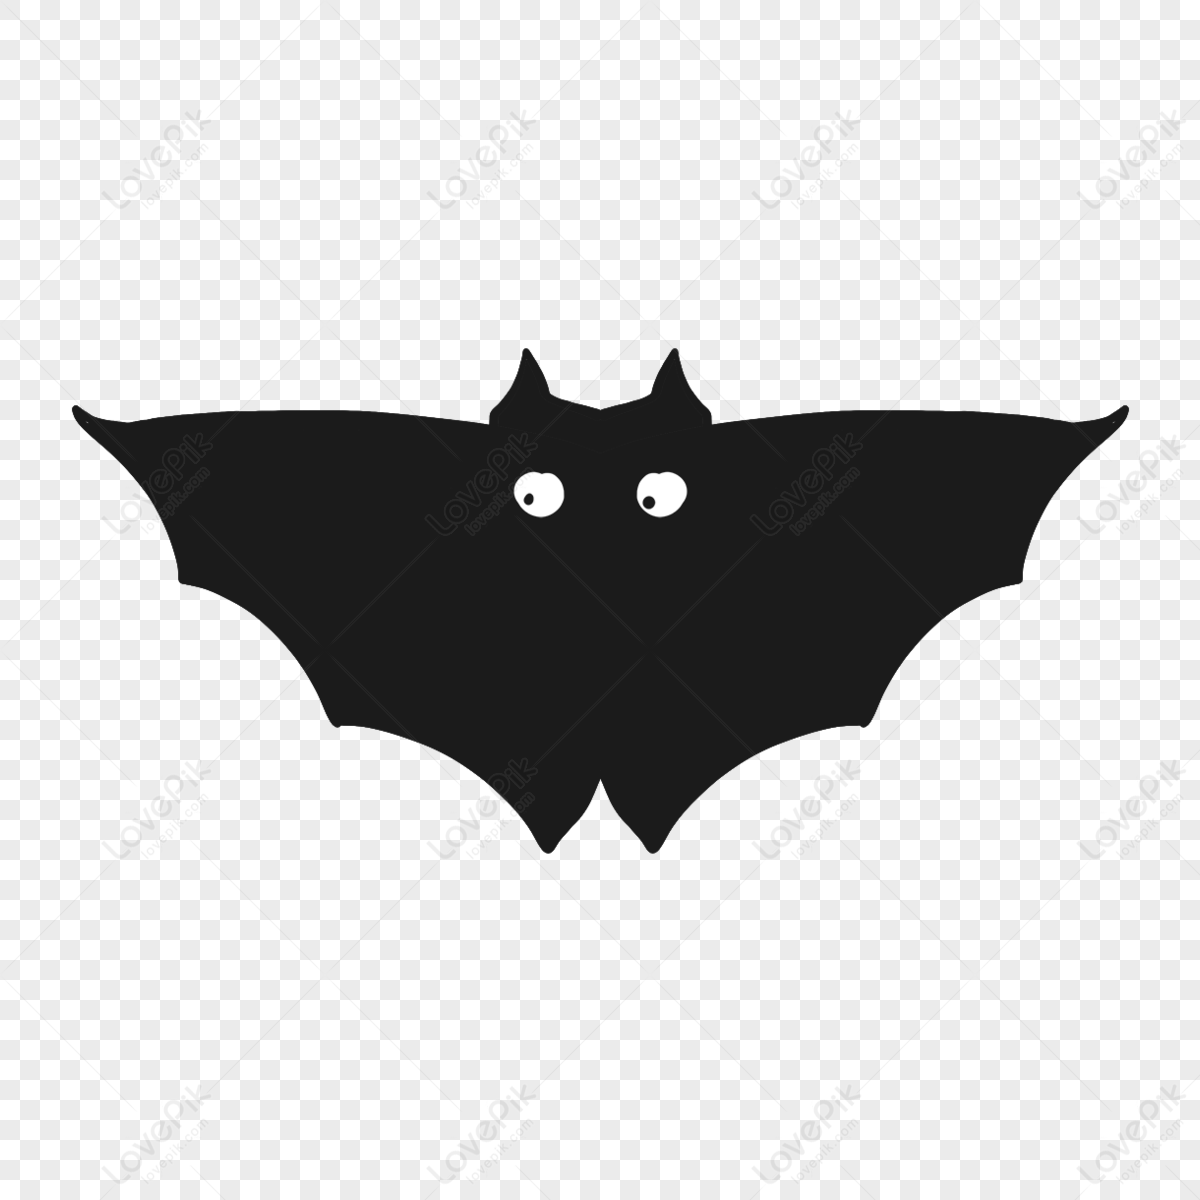 Chunky Bat Clip Art,health,pictures,baby Free PNG And Clipart Image For ...